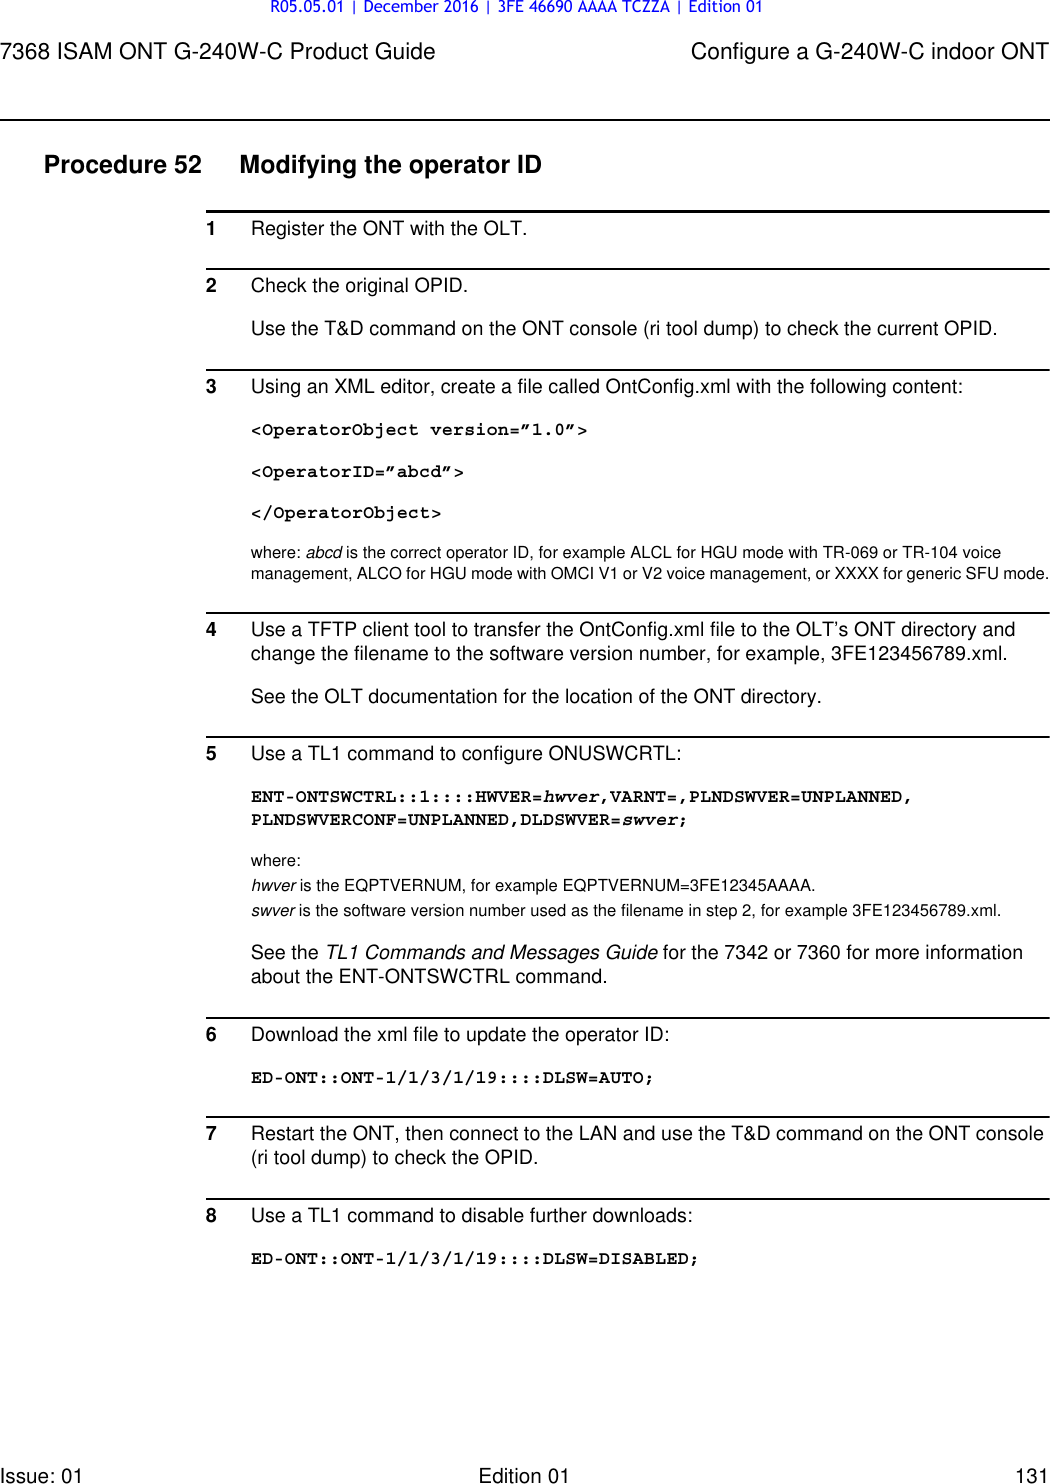 Page 131 of Nokia Bell G240W-C GPON ONU User Manual 7368 ISAM ONT G 240W B Product Guide